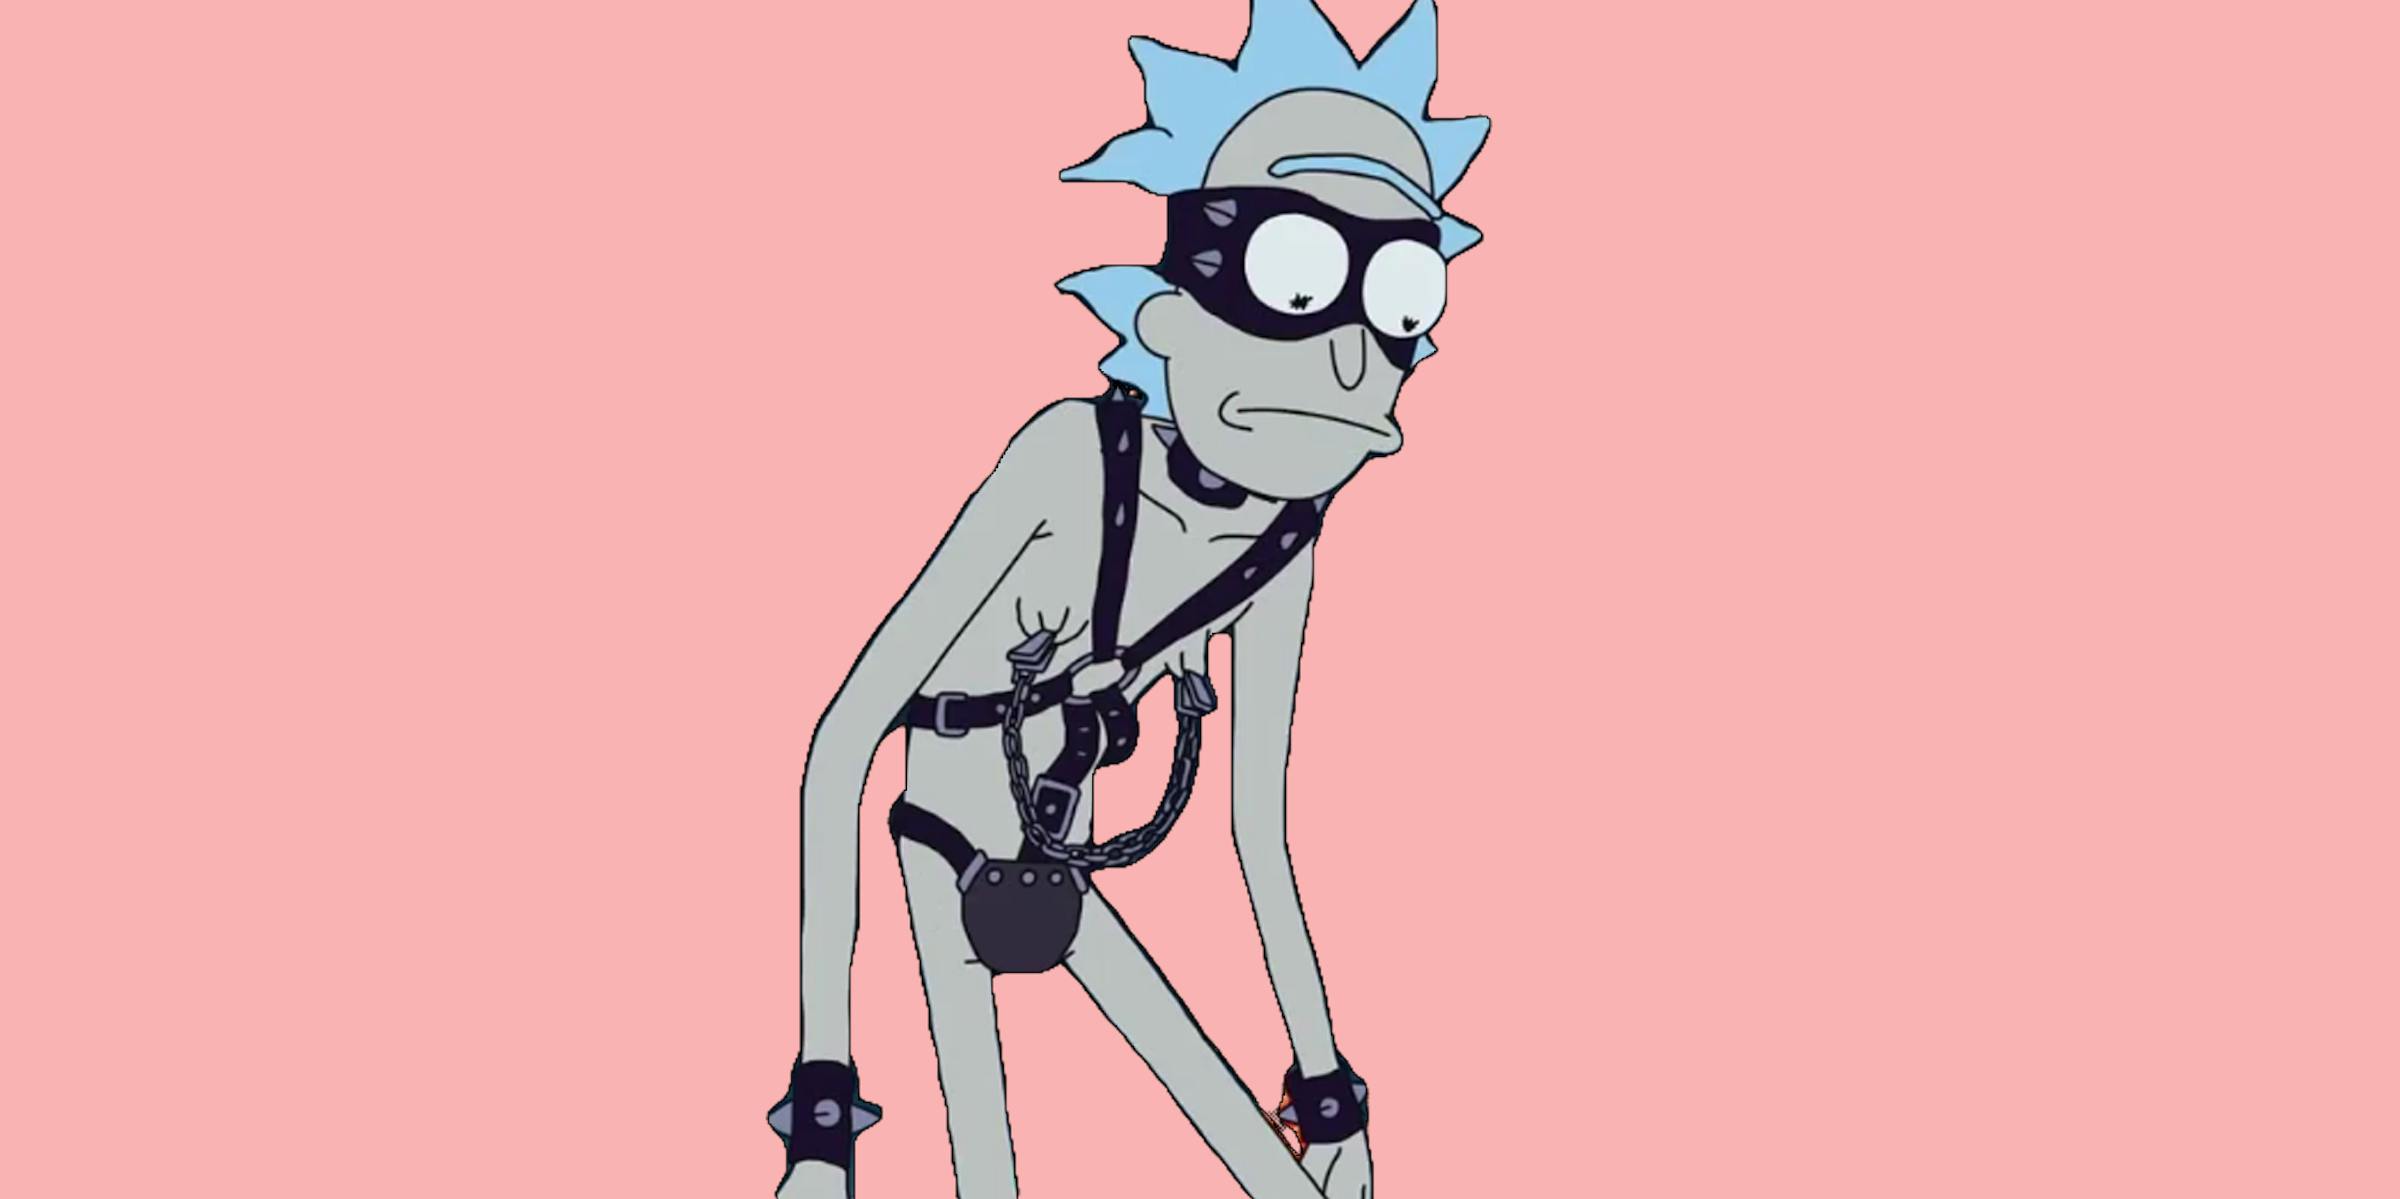 Why Do So Many Rick And Morty Fans Want To Bone Rick